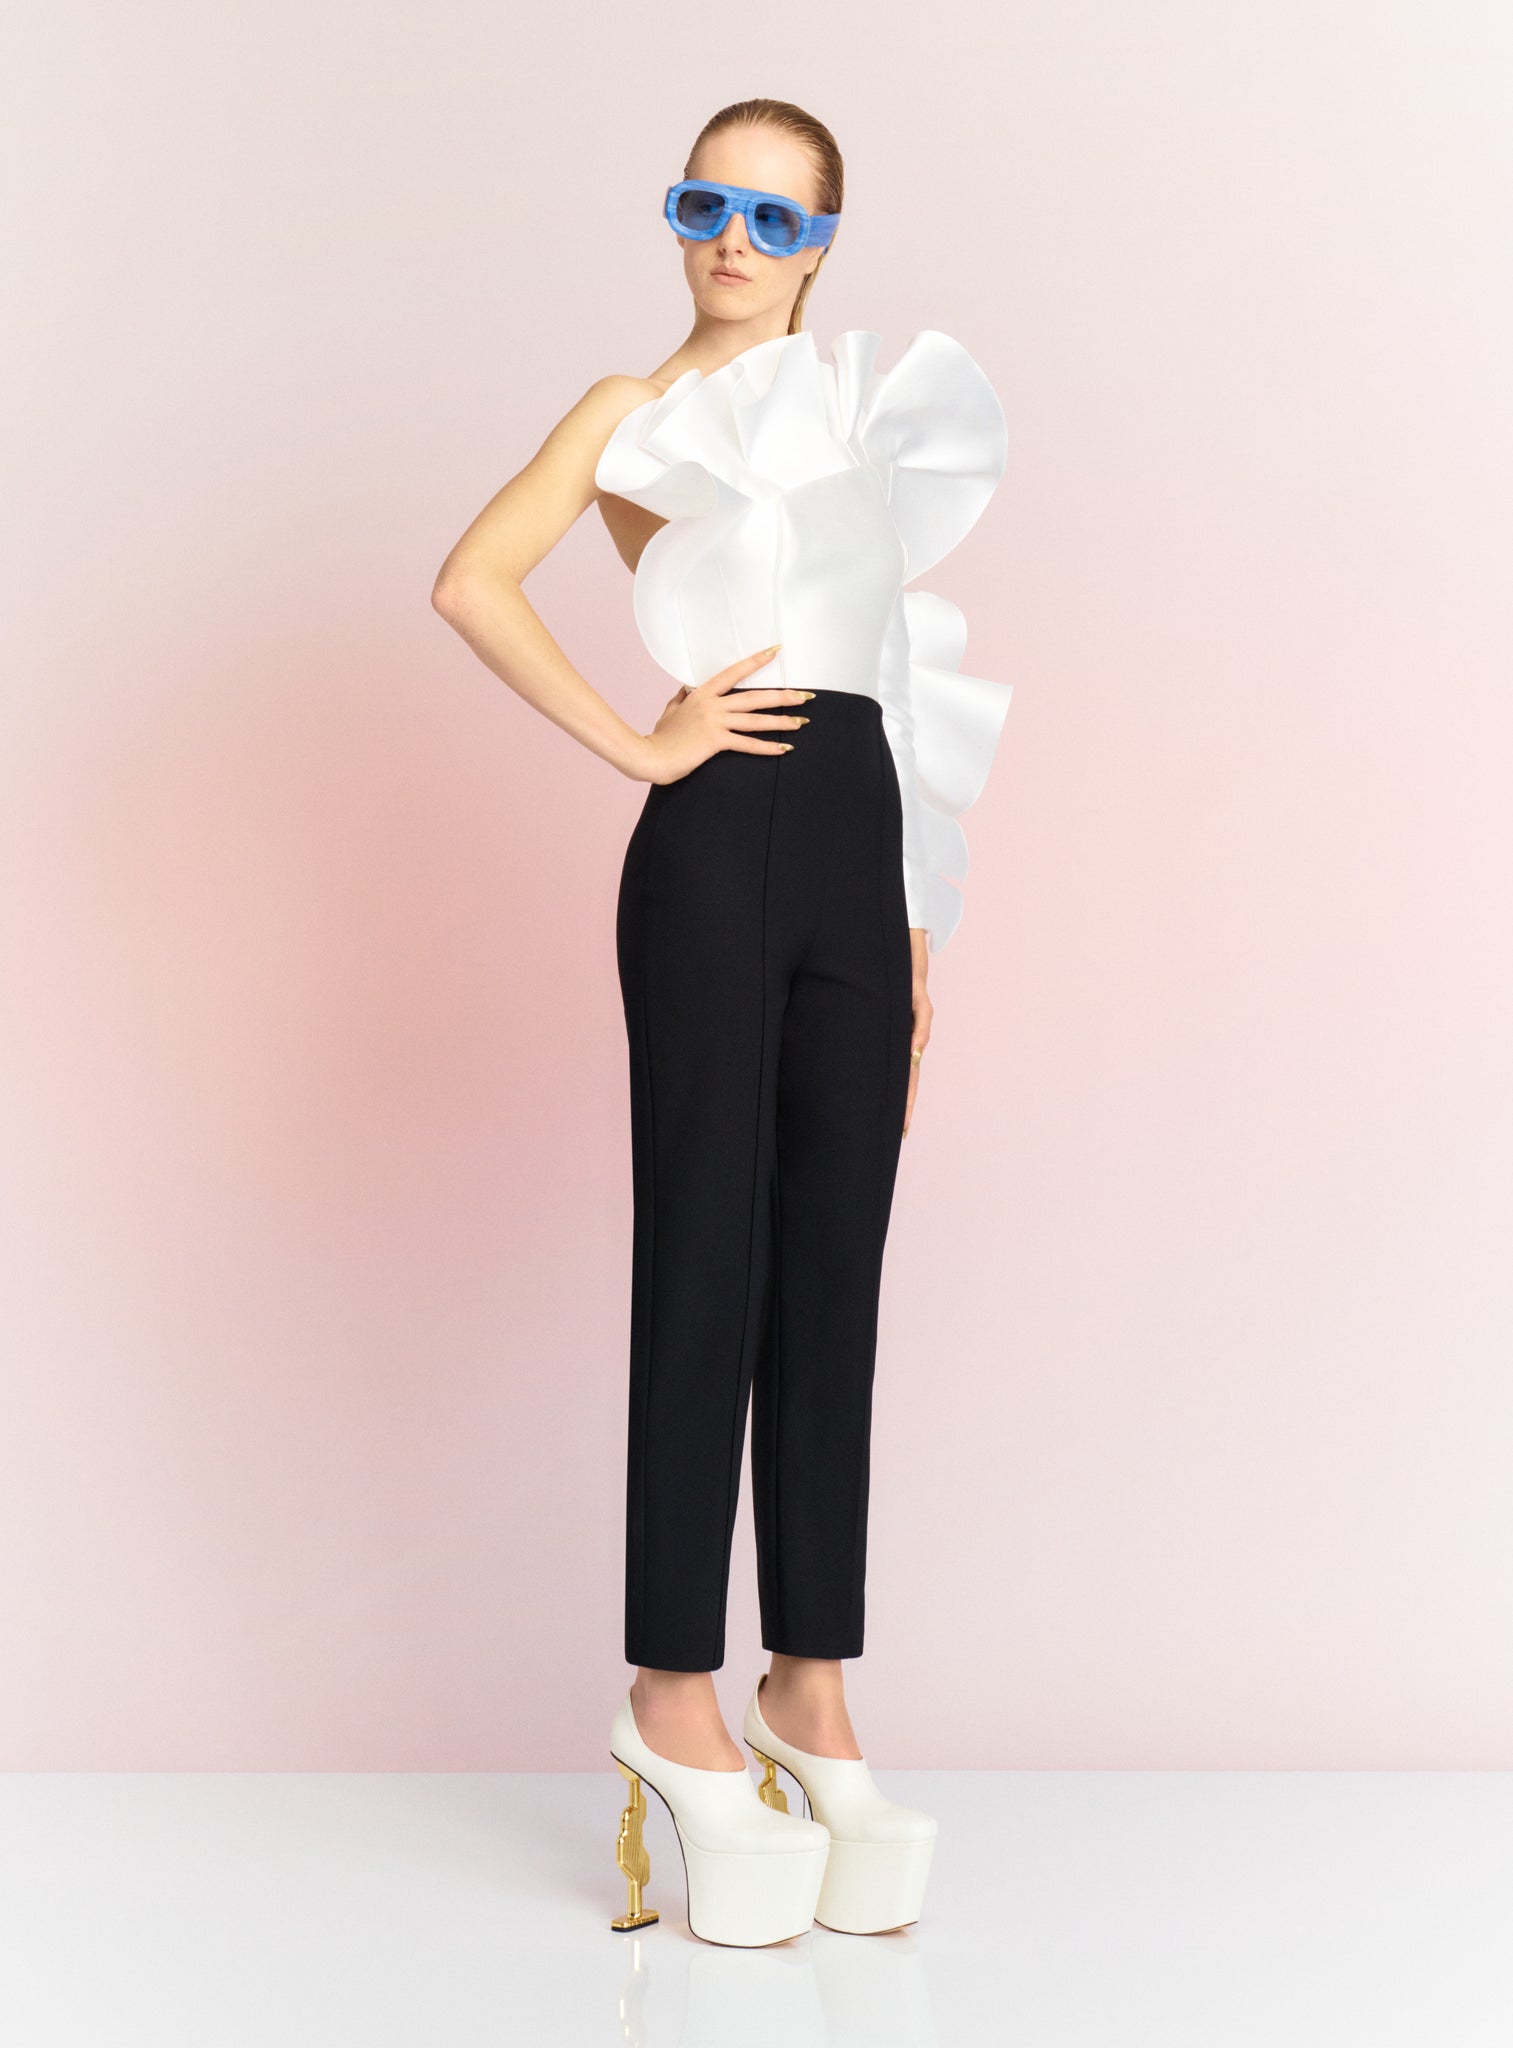 The Hana Jumpsuit in Cream and Black